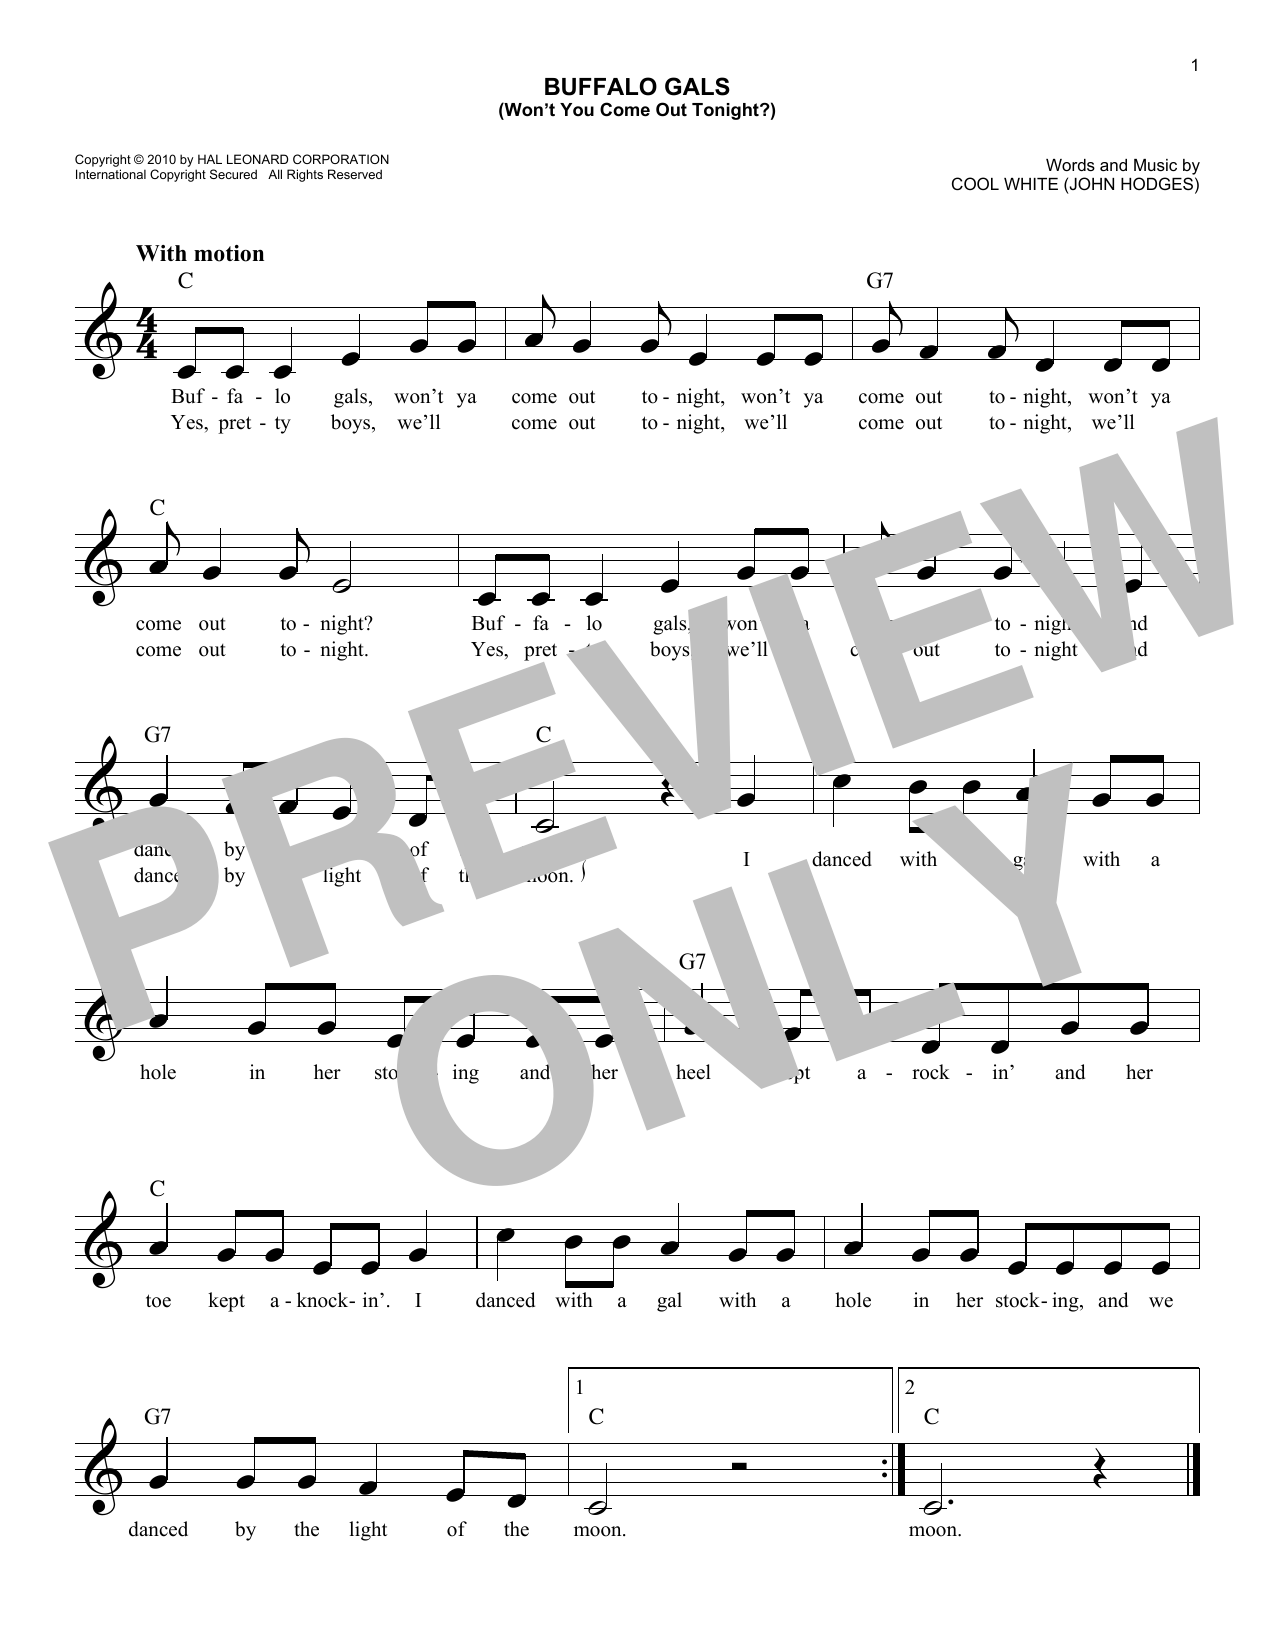 Cool White (John Hodges) Buffalo Gals (Won't You Come Out Tonight?) sheet music preview music notes and score for E-Z Play Today including 1 page(s)